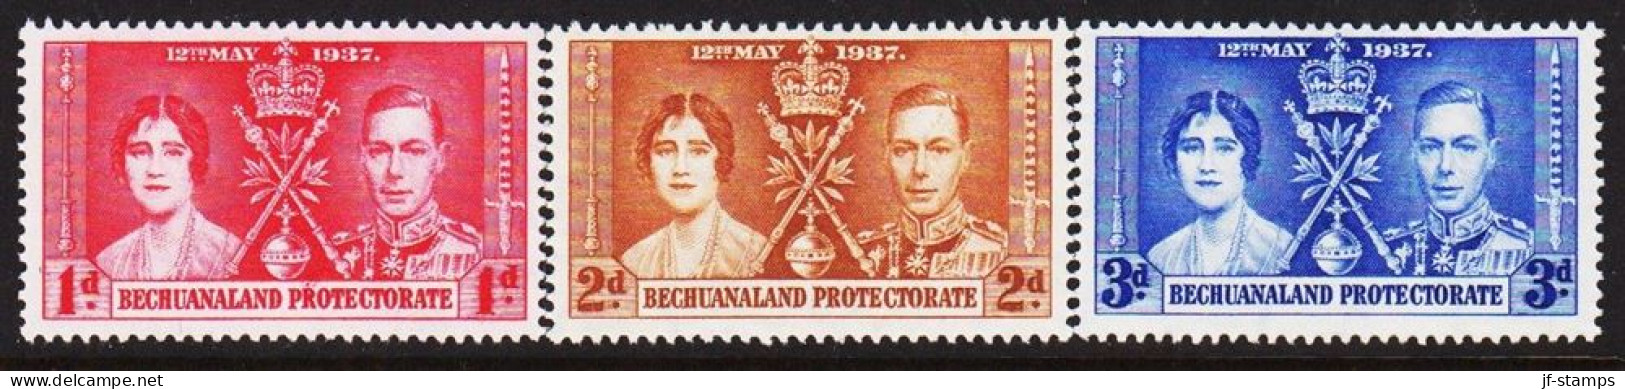 1937. BECHUANALAND. Georg VI Coronation Complete Set Very Lightly Hinged.  (MICHEL 98-100) - JF542499 - 1885-1964 Bechuanaland Protettorato